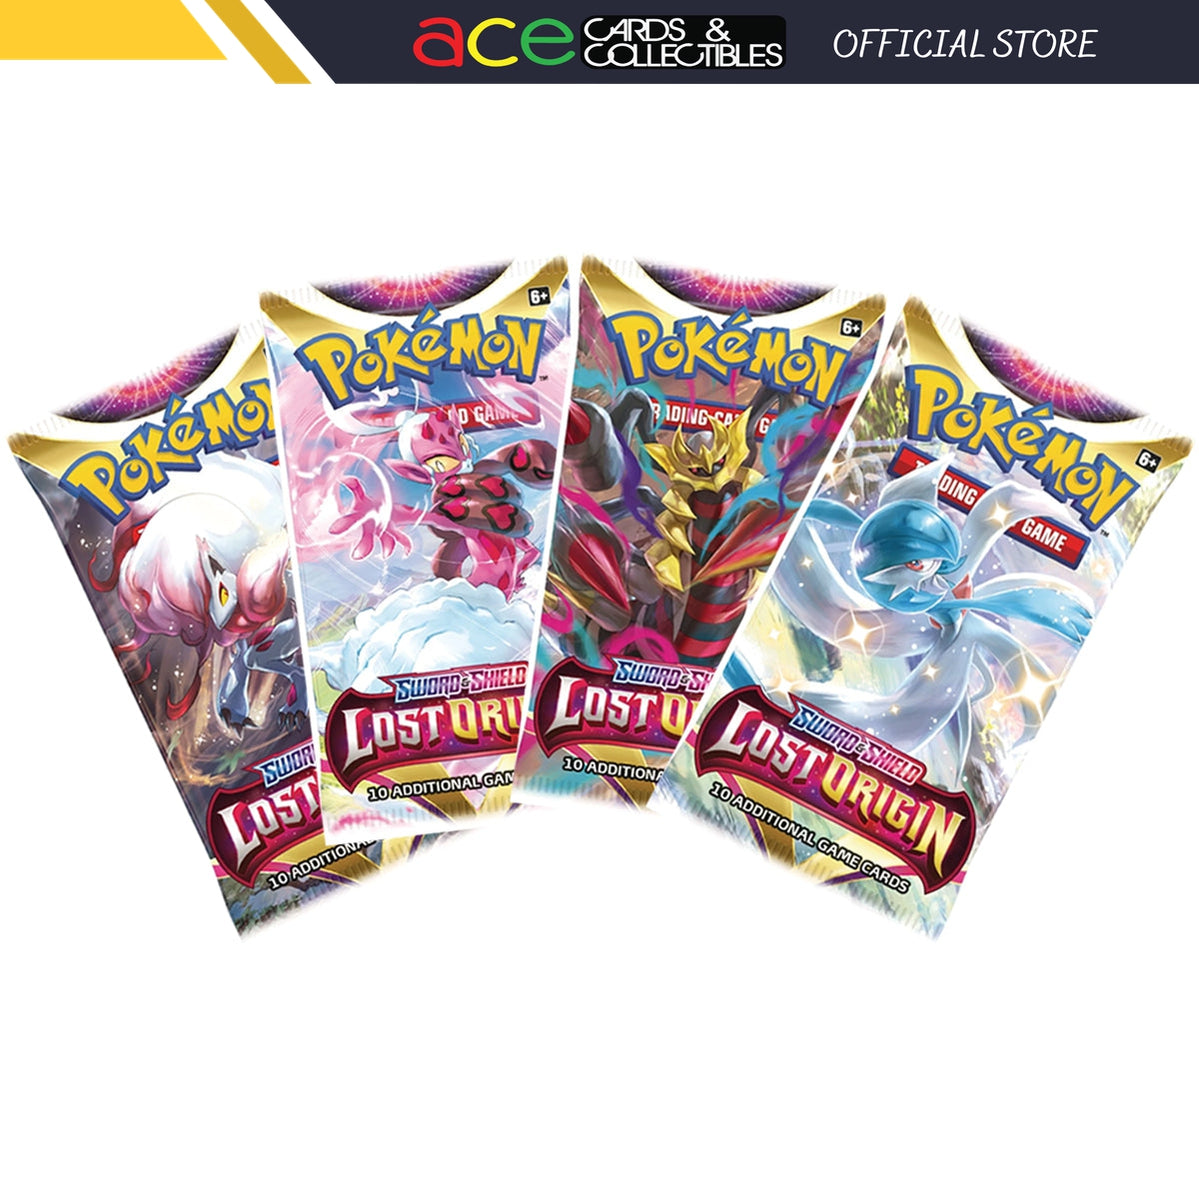 Pokemon TCG (English & Chinese) 标签语法页面- Ace Cards & Collectibles